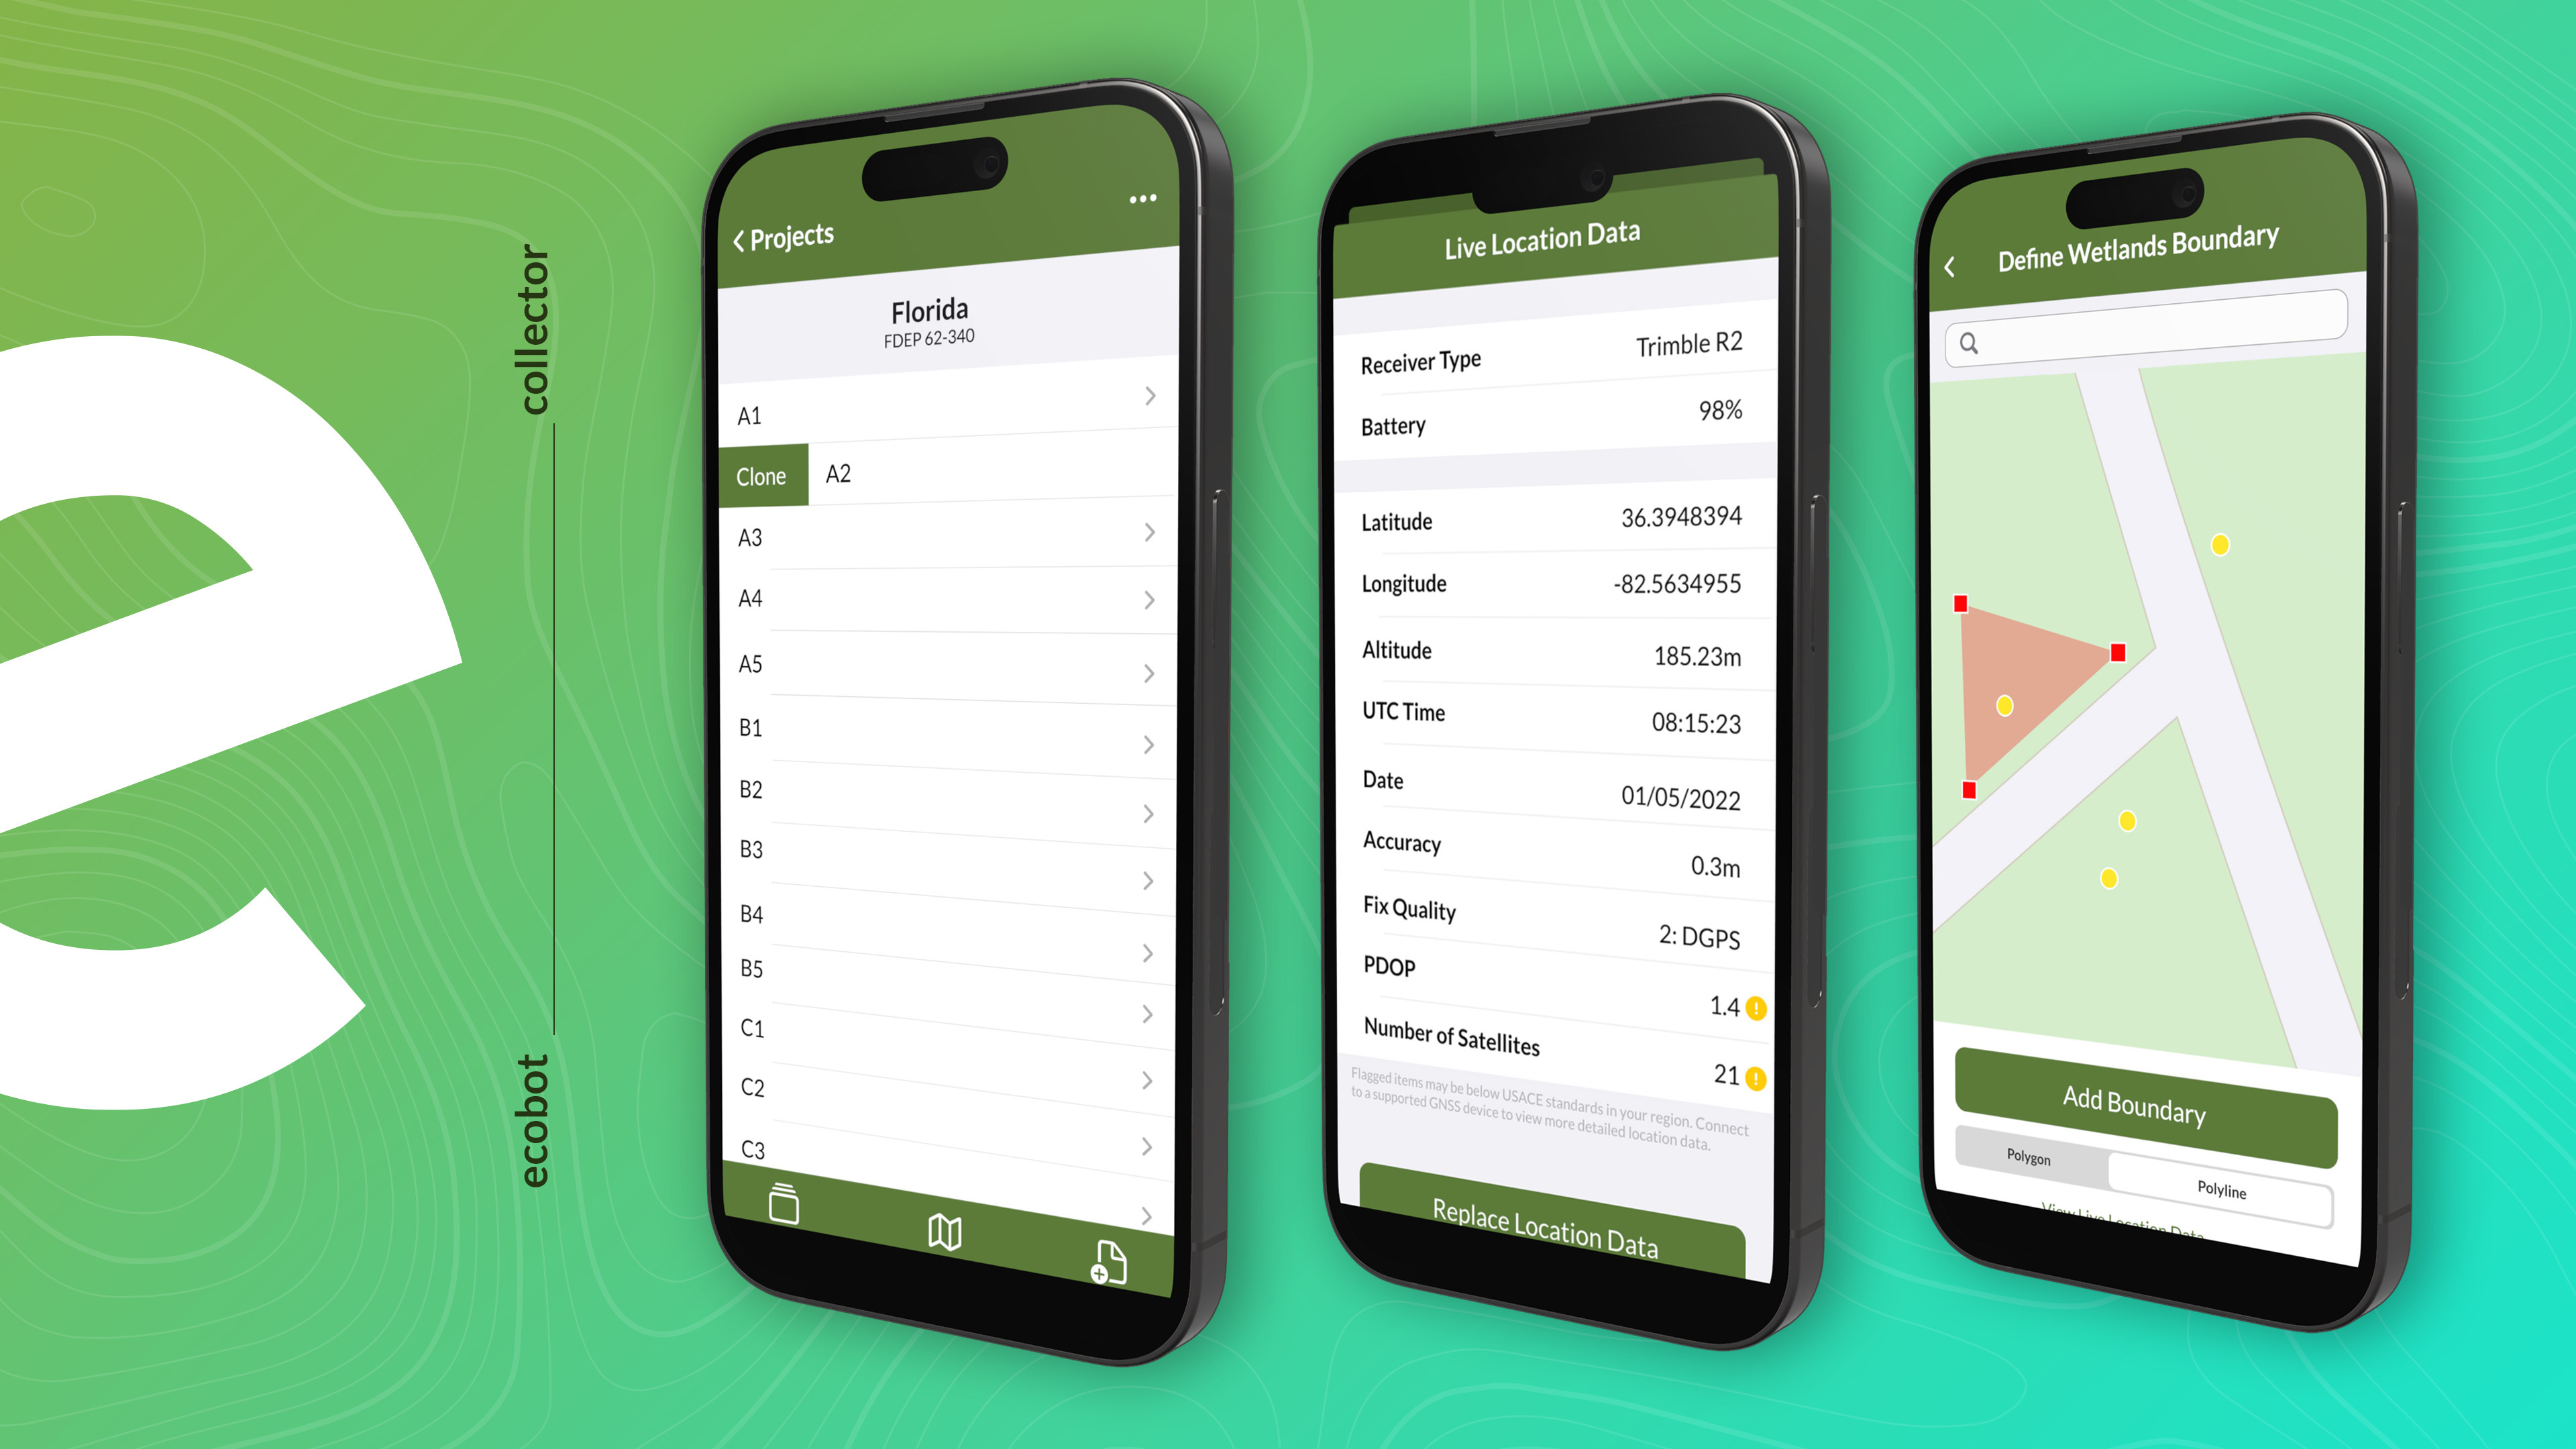 Ecobot Collector is available for Android and iOS. Sync field data collection in Ecobot Collector to Ecobot Manager via the cloud.